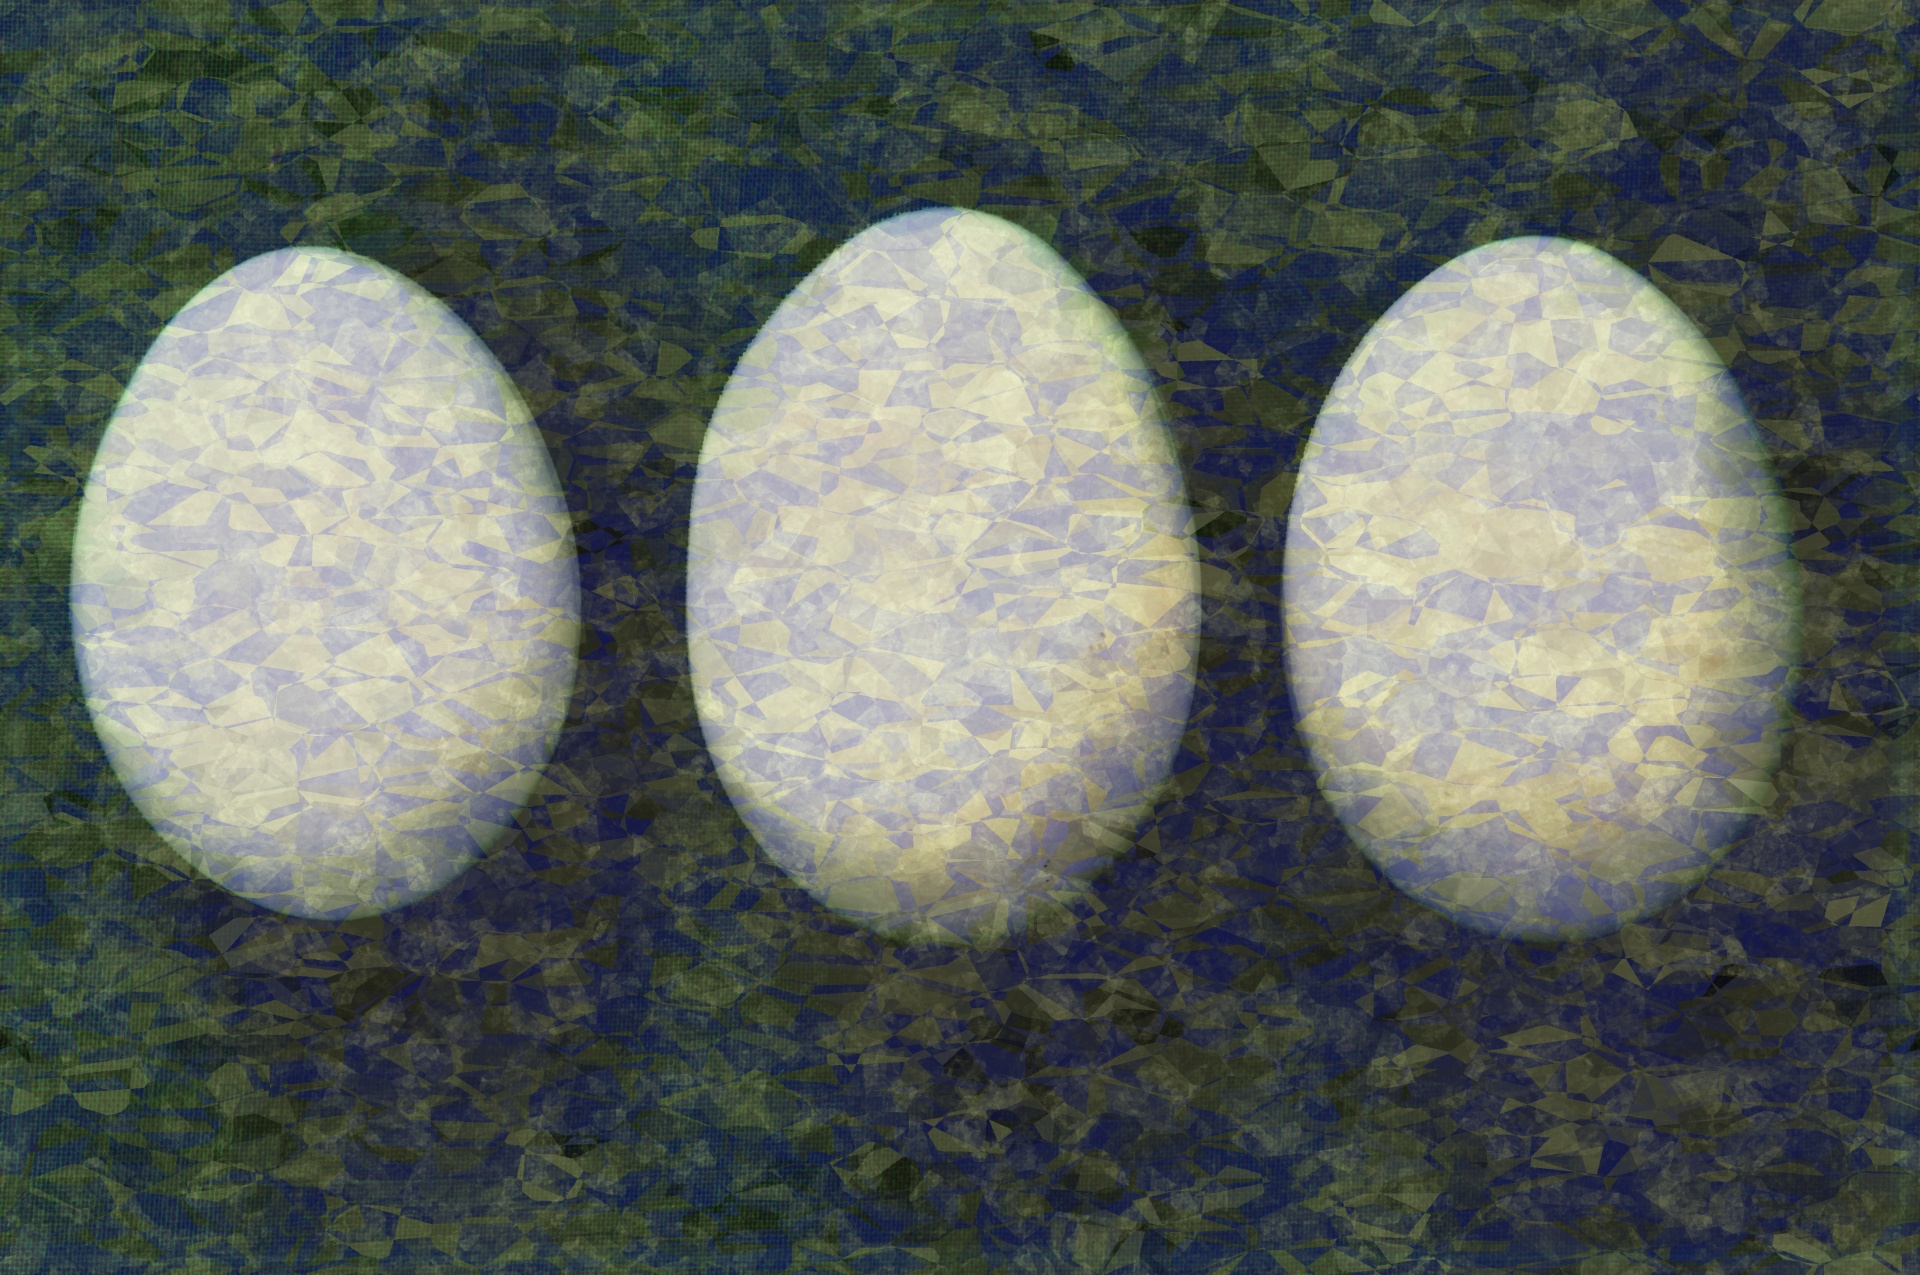 Patterned Eggs